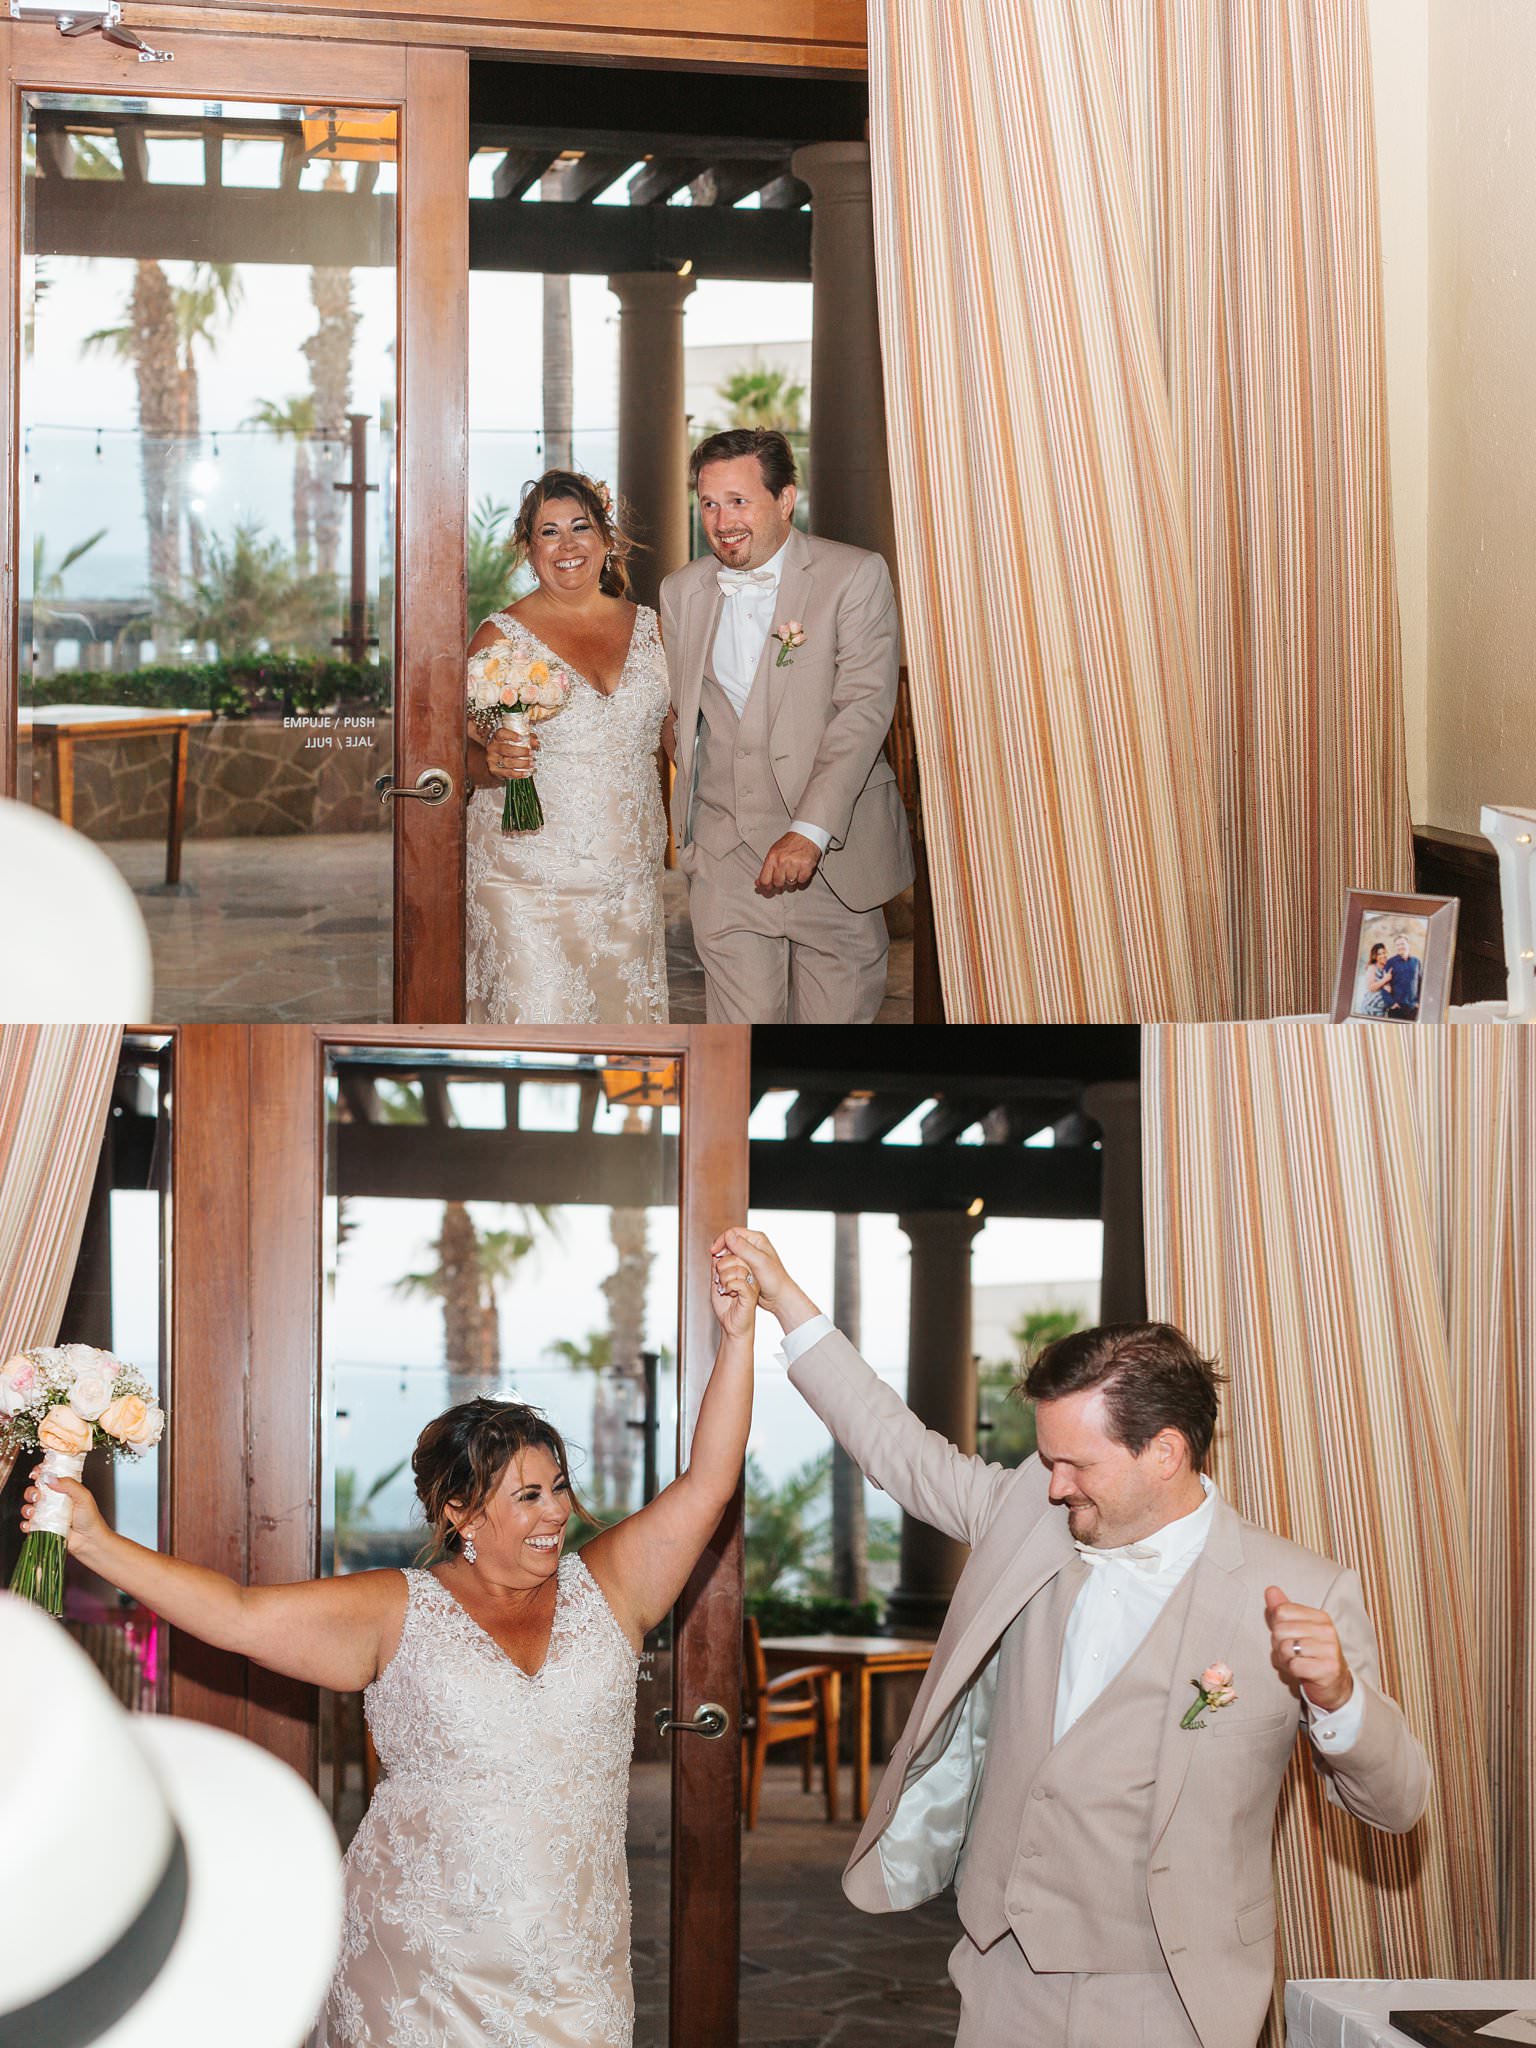 Bride and Groom's grand entrance into their wedding reception in Cabo - https://brittneyhannonphotography.com